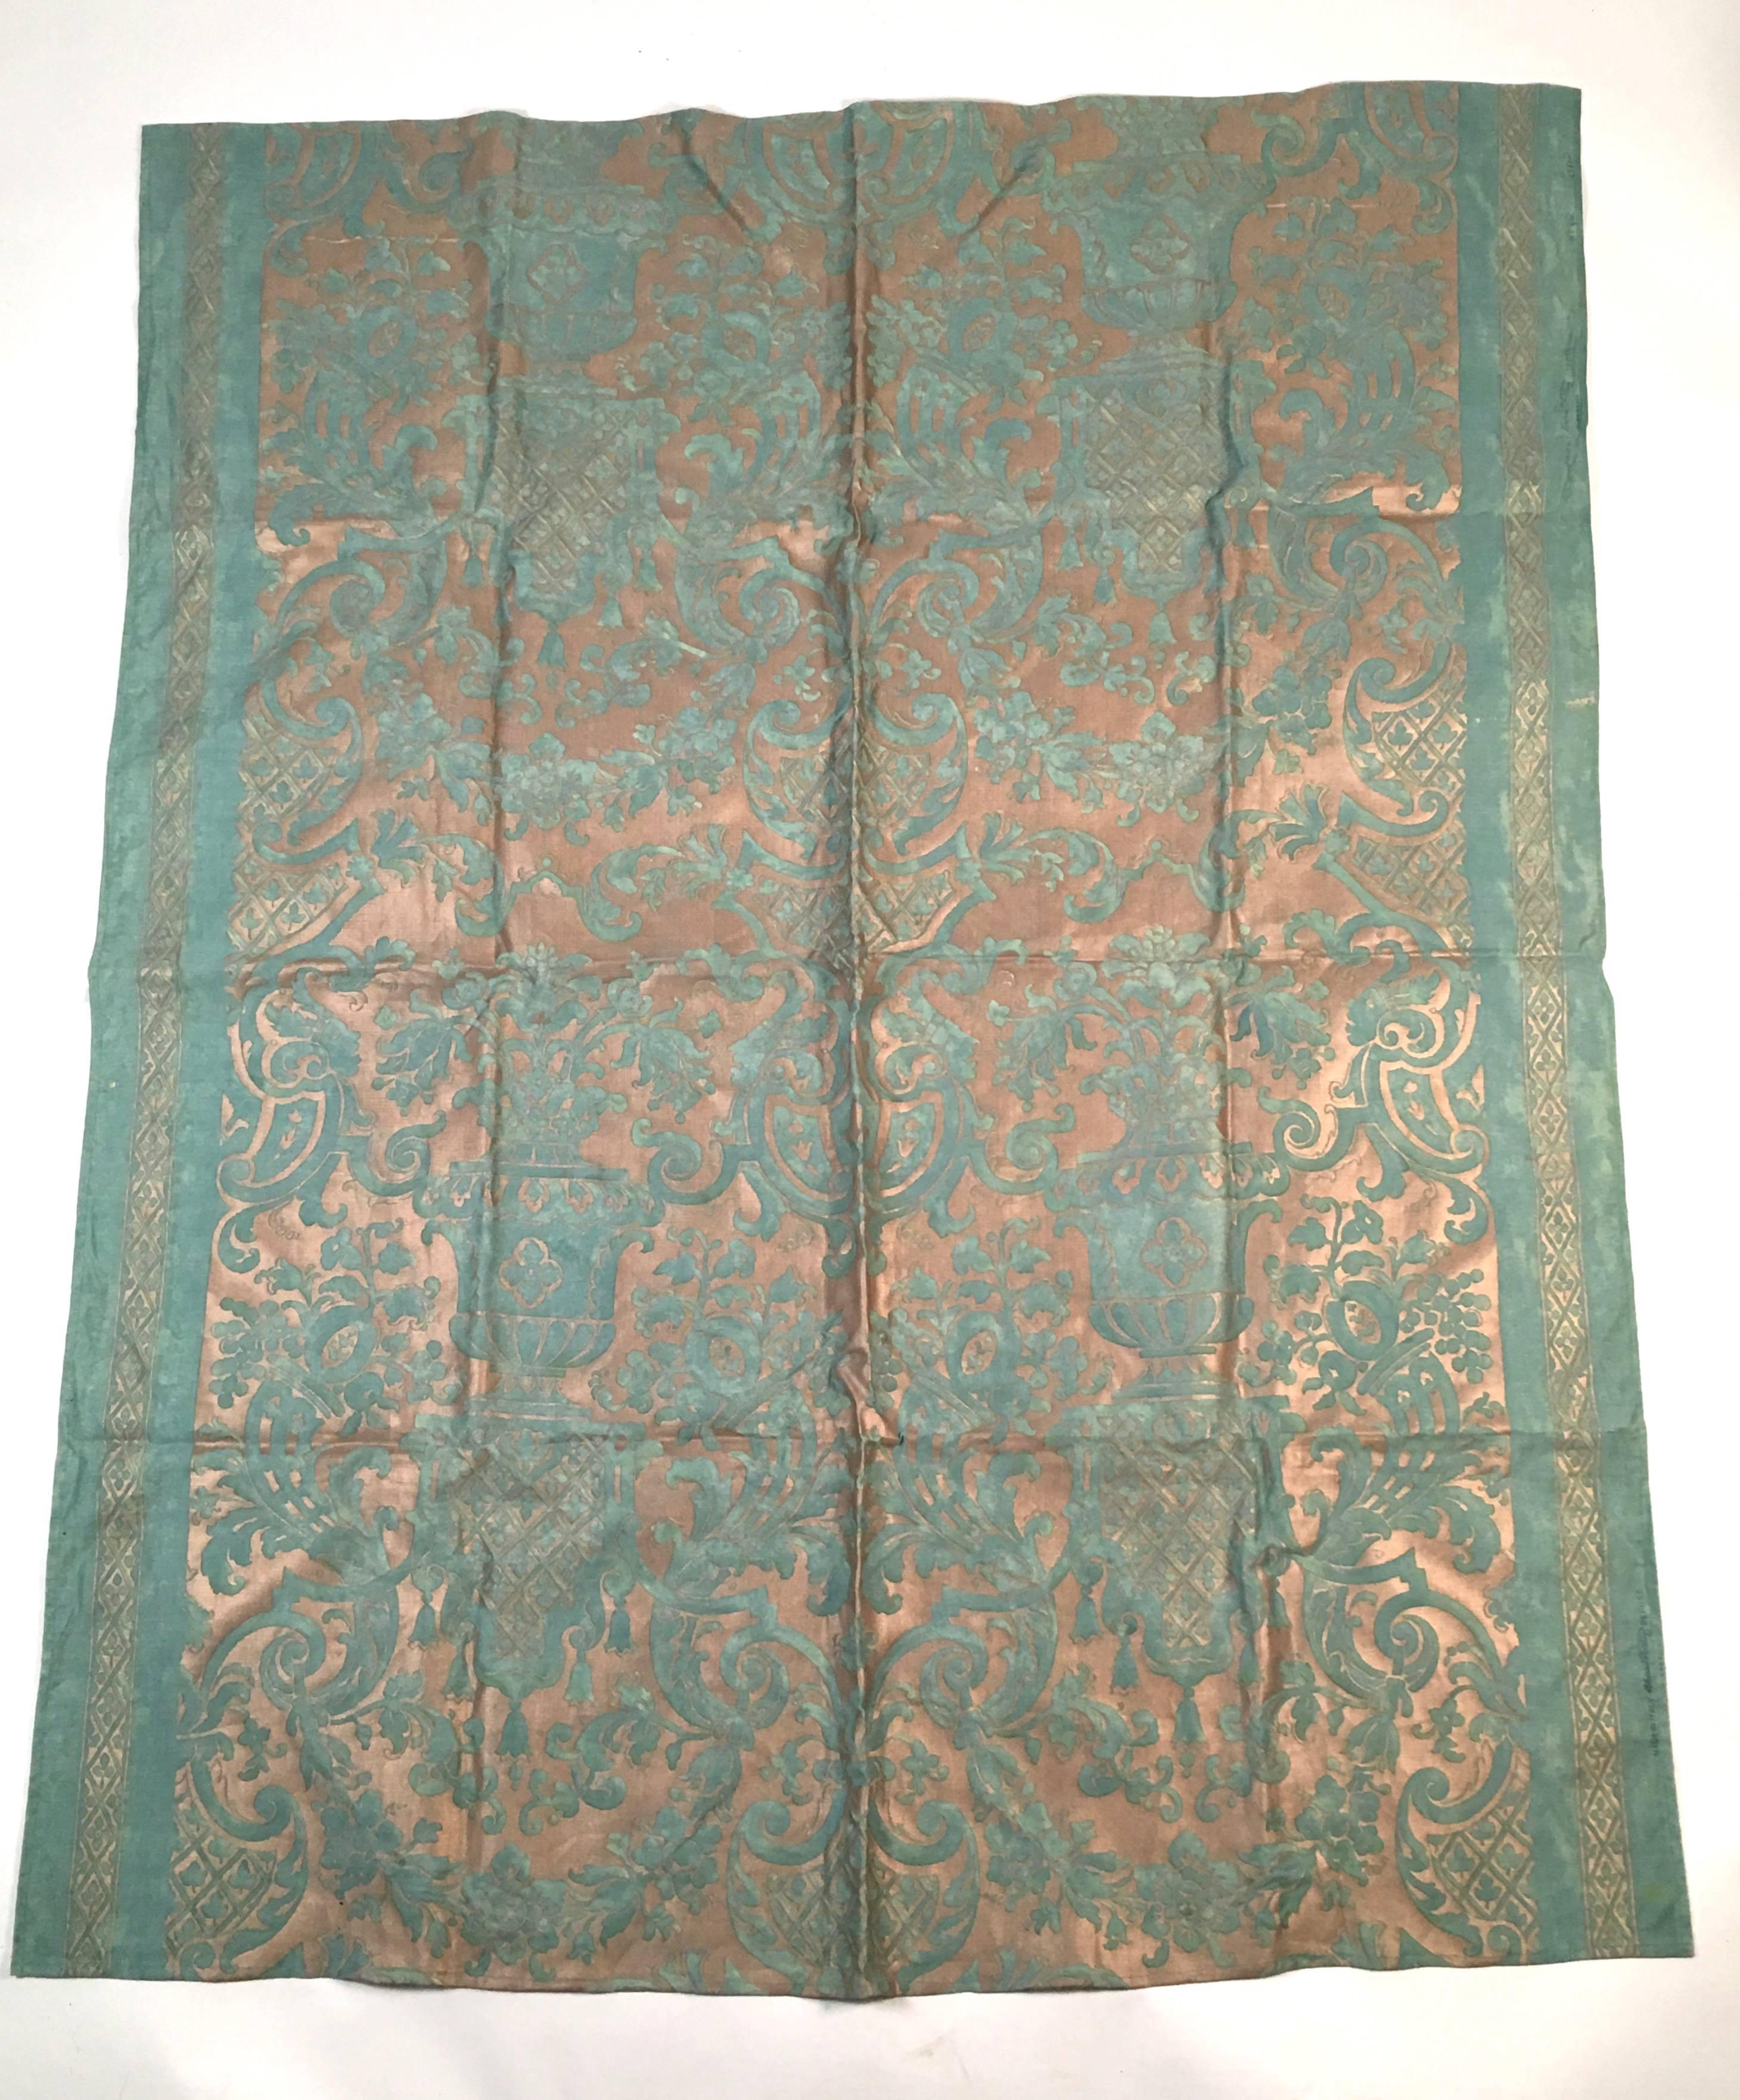 A fine large panel of original vintage Fortuny fabric in jade green and gold in the Carnavalet pattern, which features classical urns with sprays of flowers issuing forth over Baroque style baldachins with bell flowers hanging from them. Signed